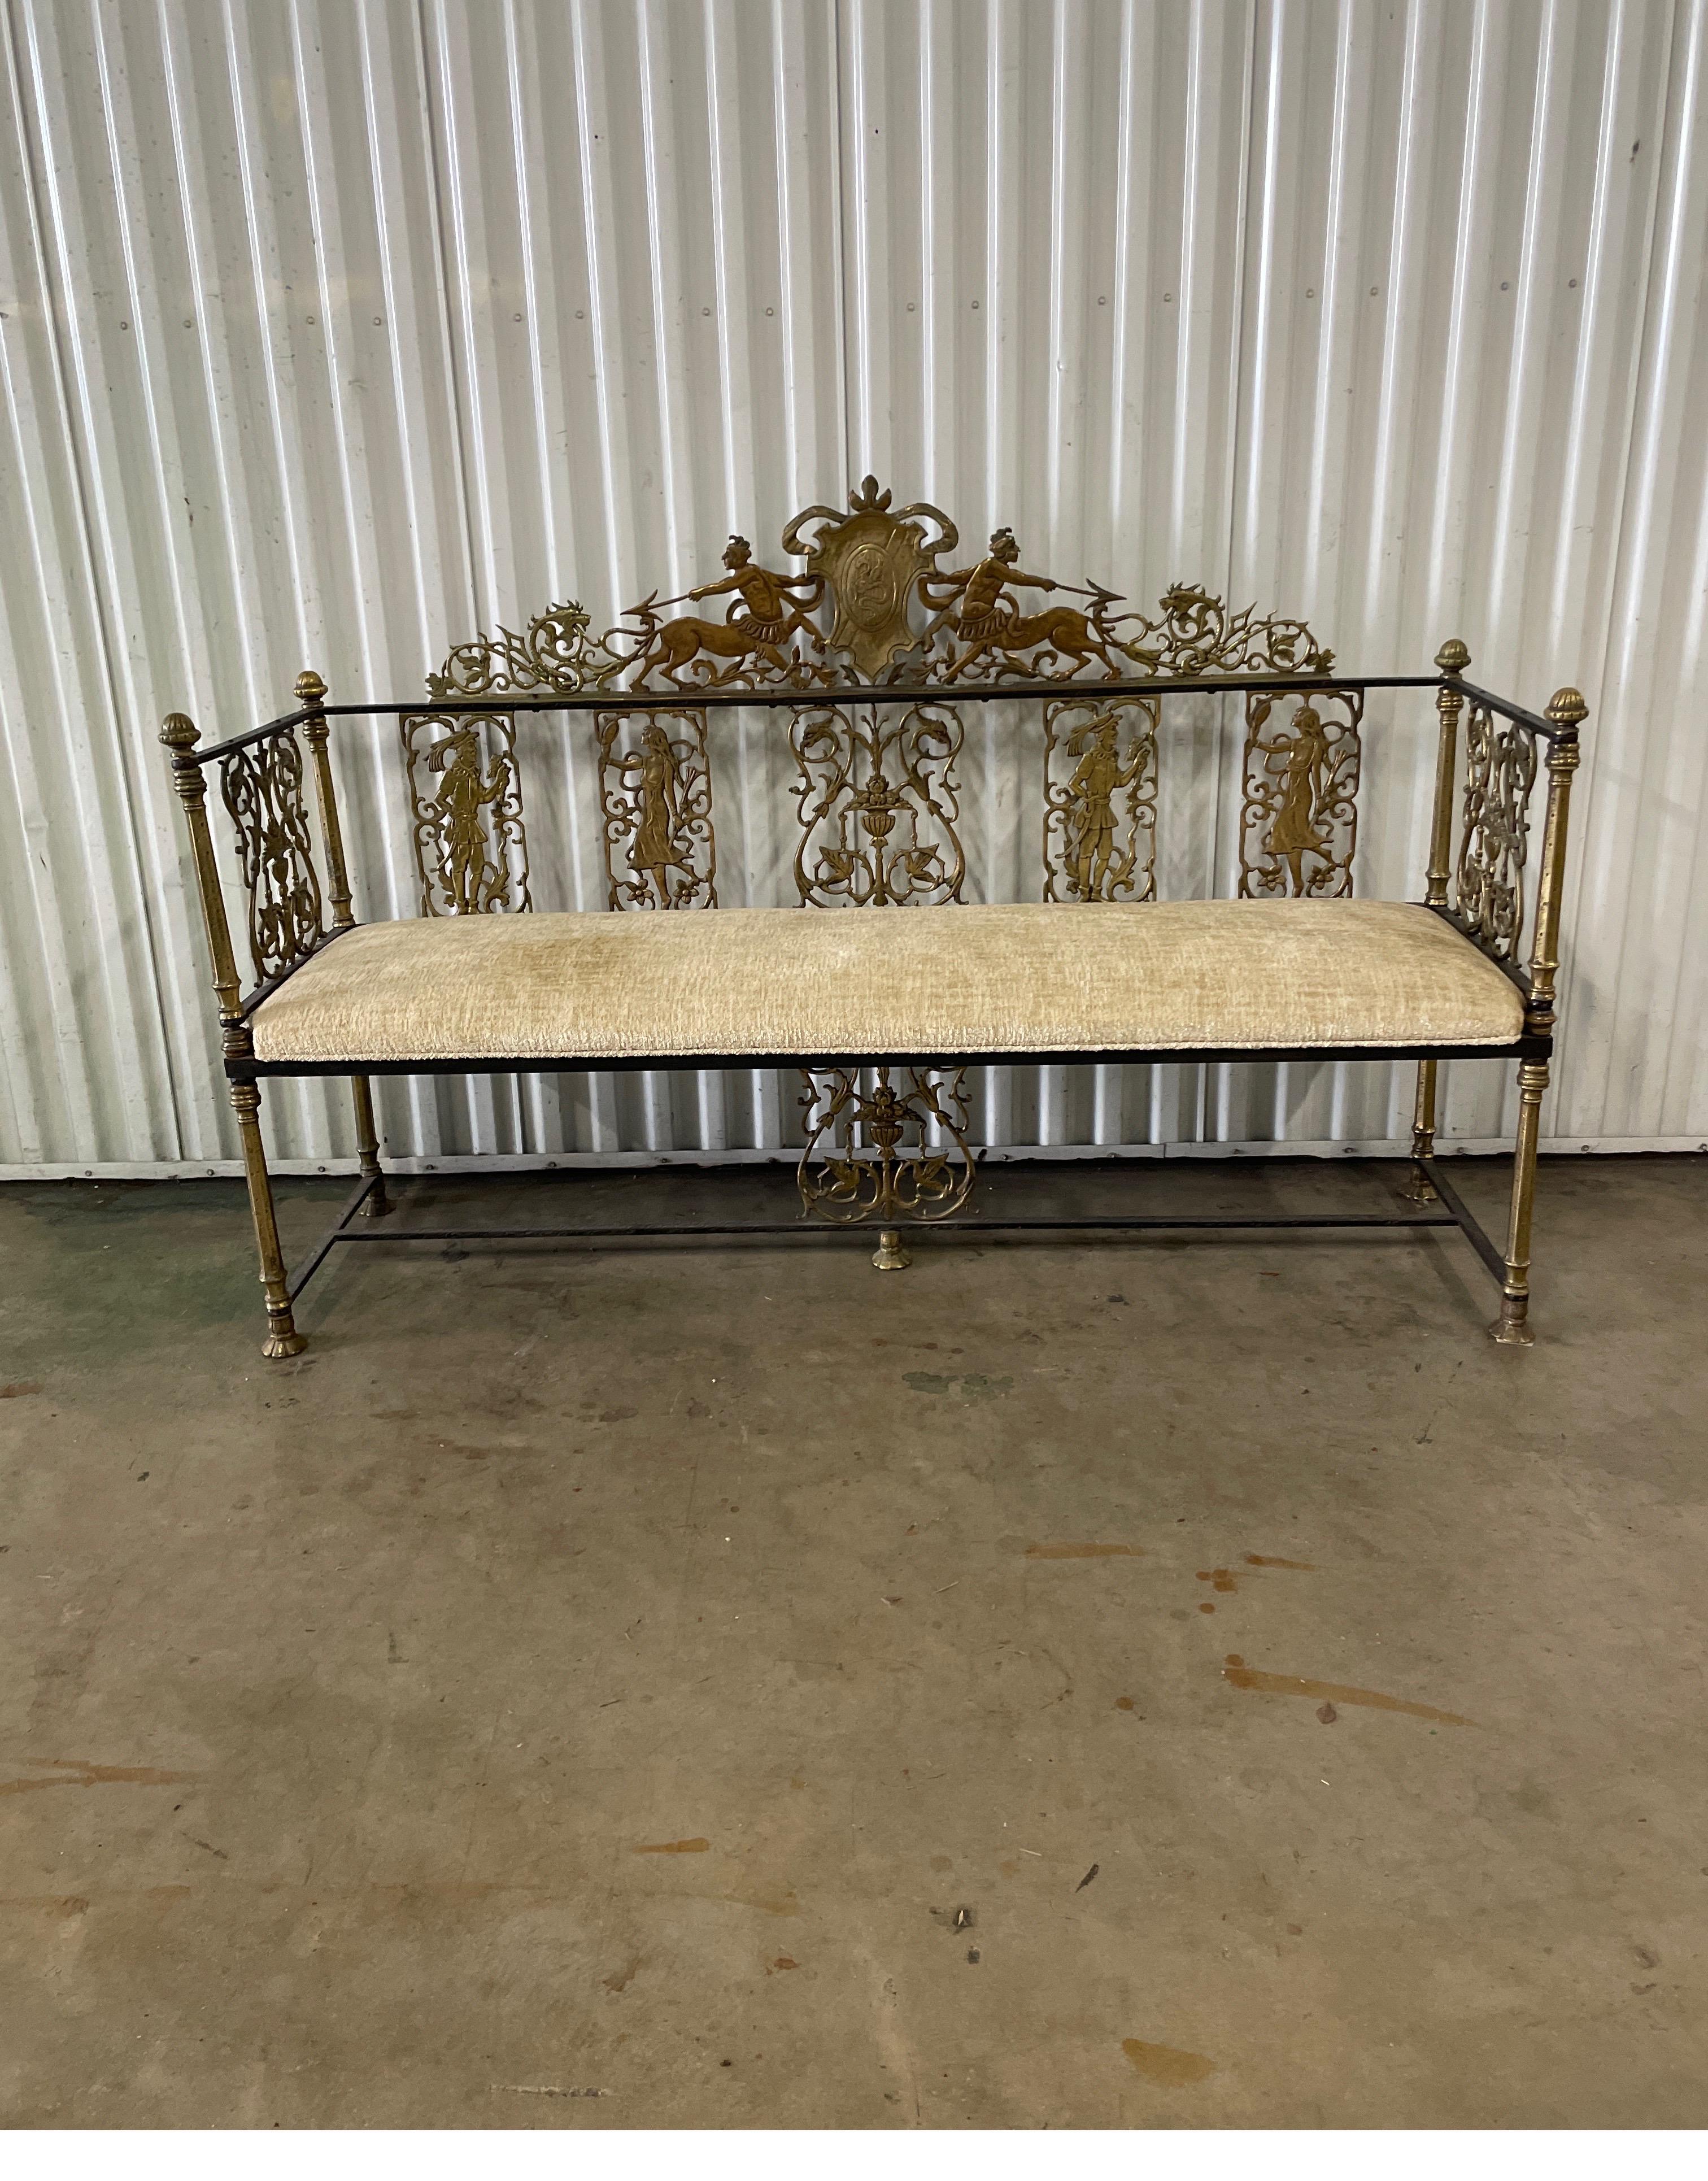 Highly unique brass & wrought iron neoclassical figural bench. This stunning bench is adorned with a dragon center crest surrounded by warriors & lions representing strength. The backrest is articulately detailed with both female & male figures.